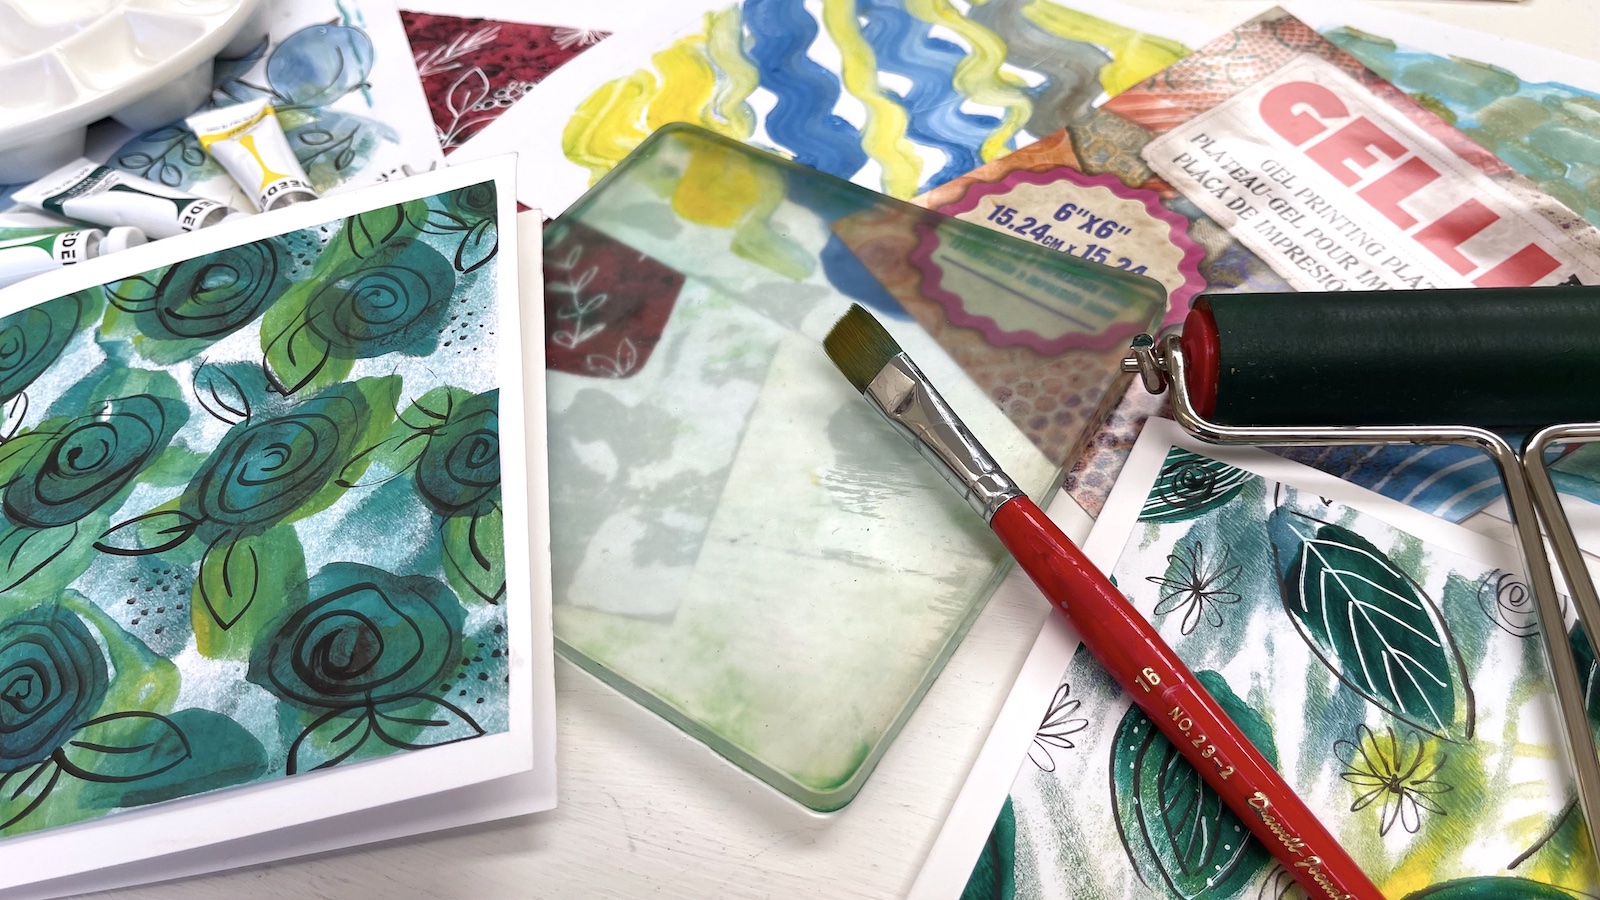 Plate to Paper Watercolour Art Kit: First Edition | Mossery